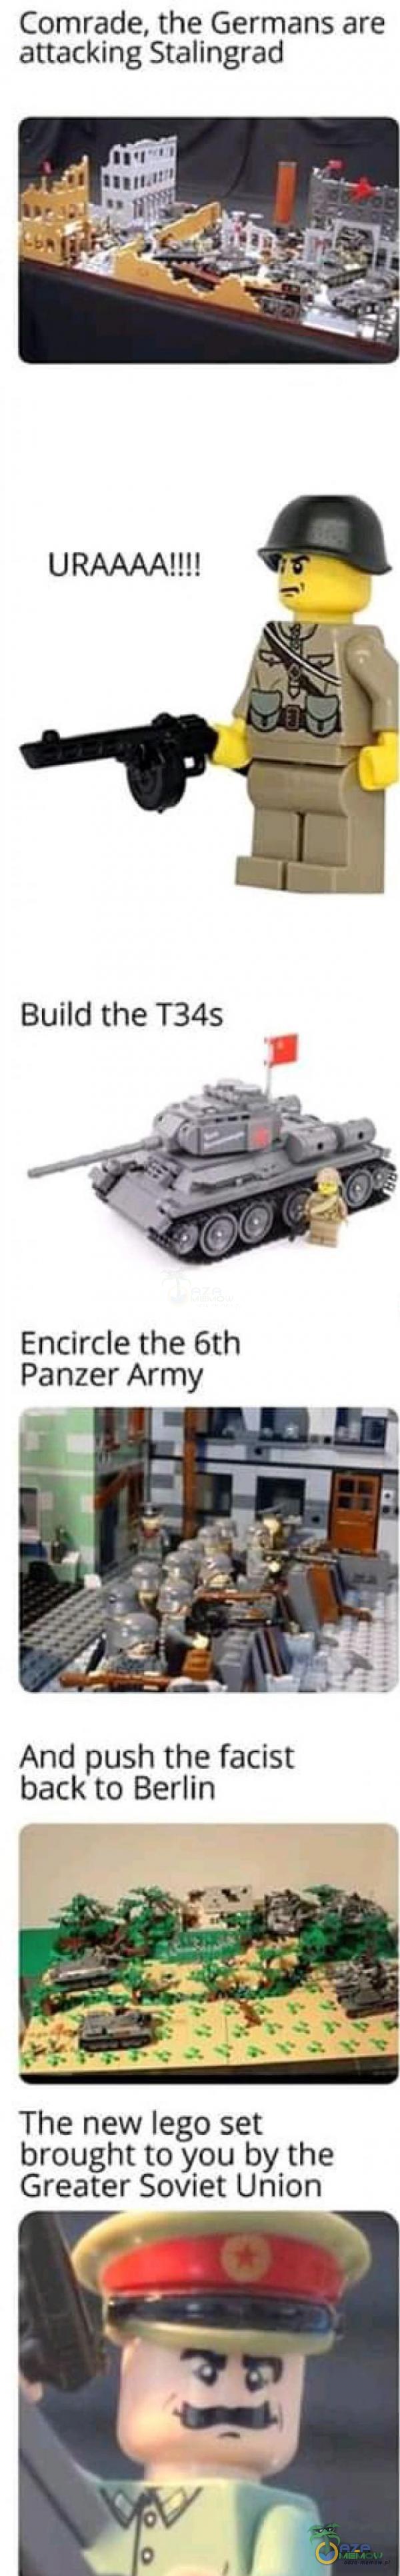 Comrade, the Germans are attacking Stalingrad Build the T34S Encircle the 6th Panzer Army And push the facist back to Berlin The new lego set brought to you by the Greater Soviet Union